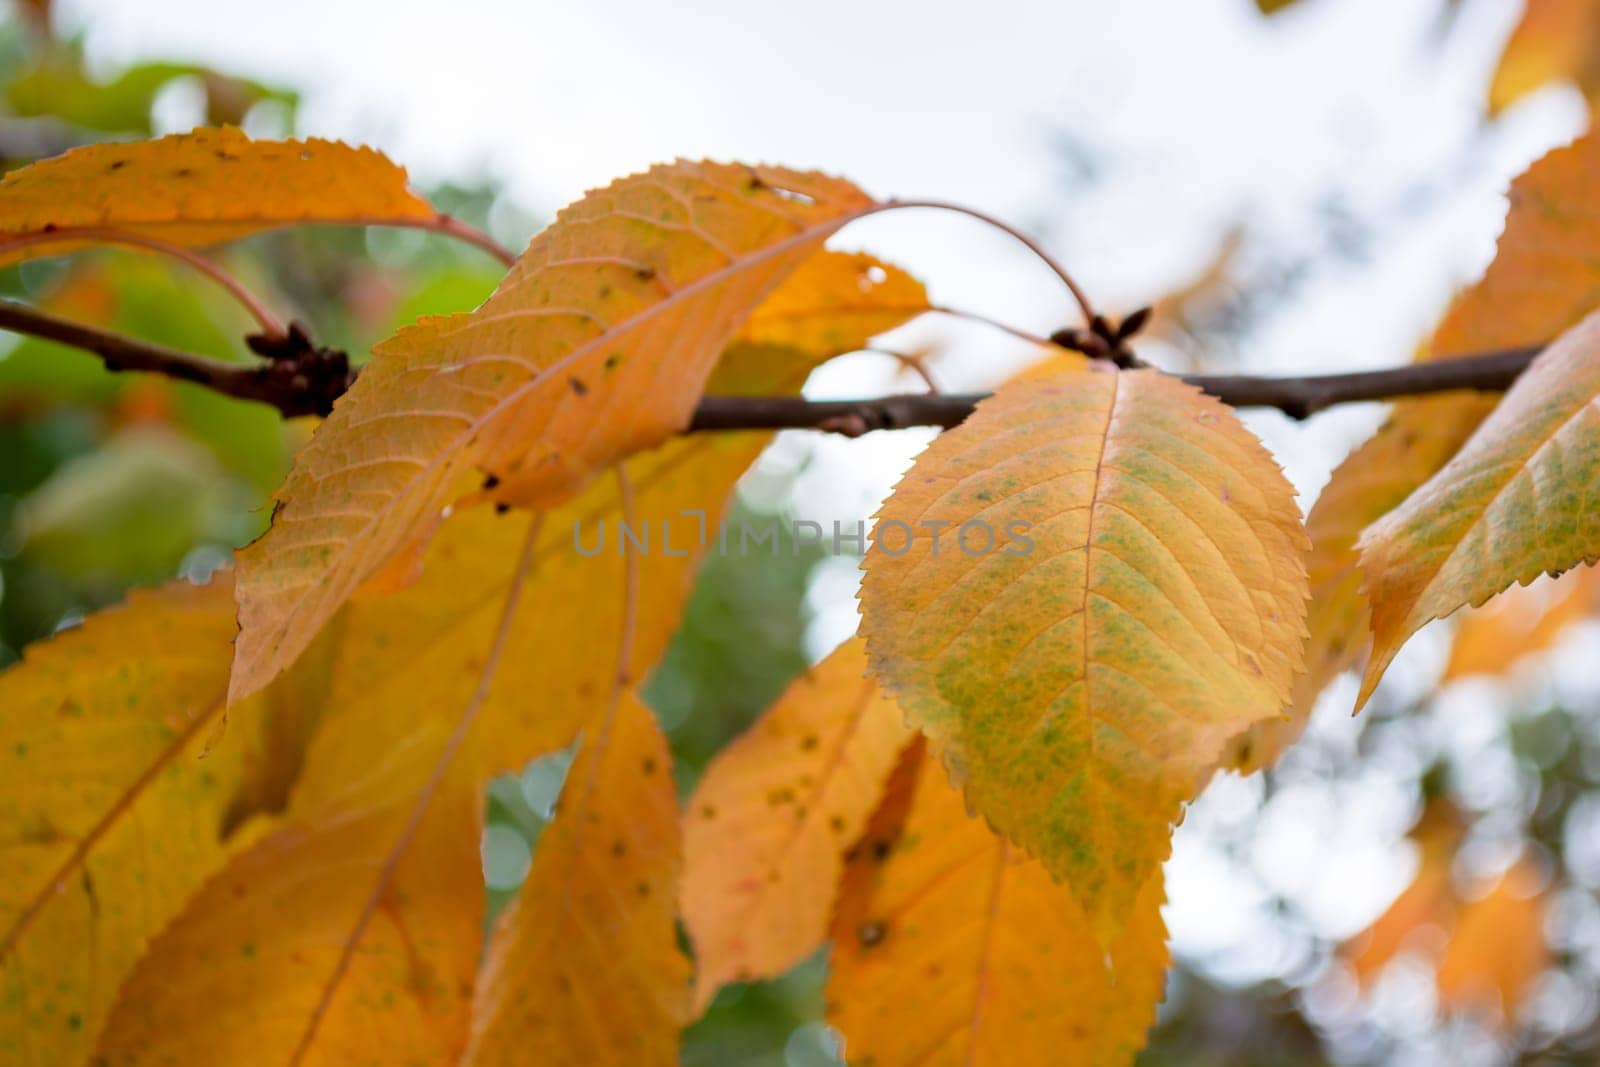 Yellow orange leaves of sweet cherry on a branch close-up against the background of an autumn pale sky.